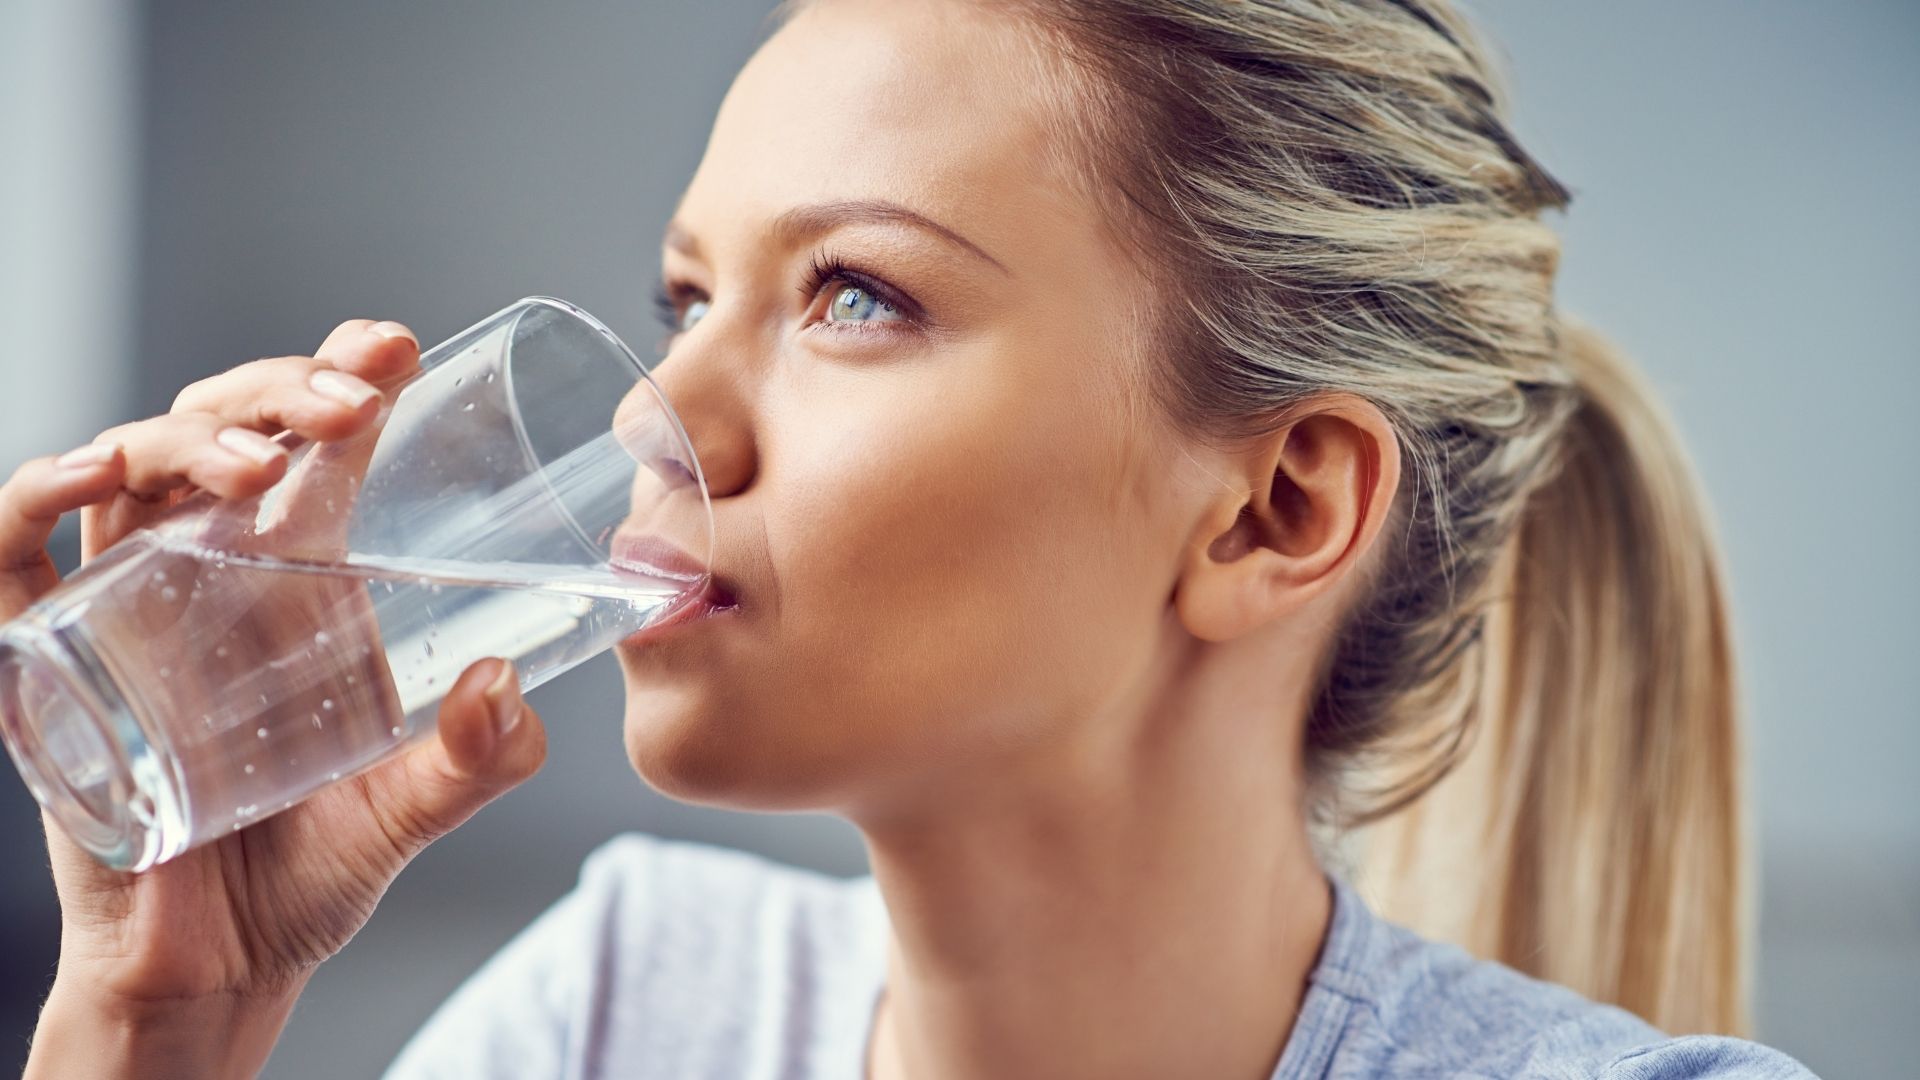 Pregnant Lady Drinking Water Before an Ultrasound